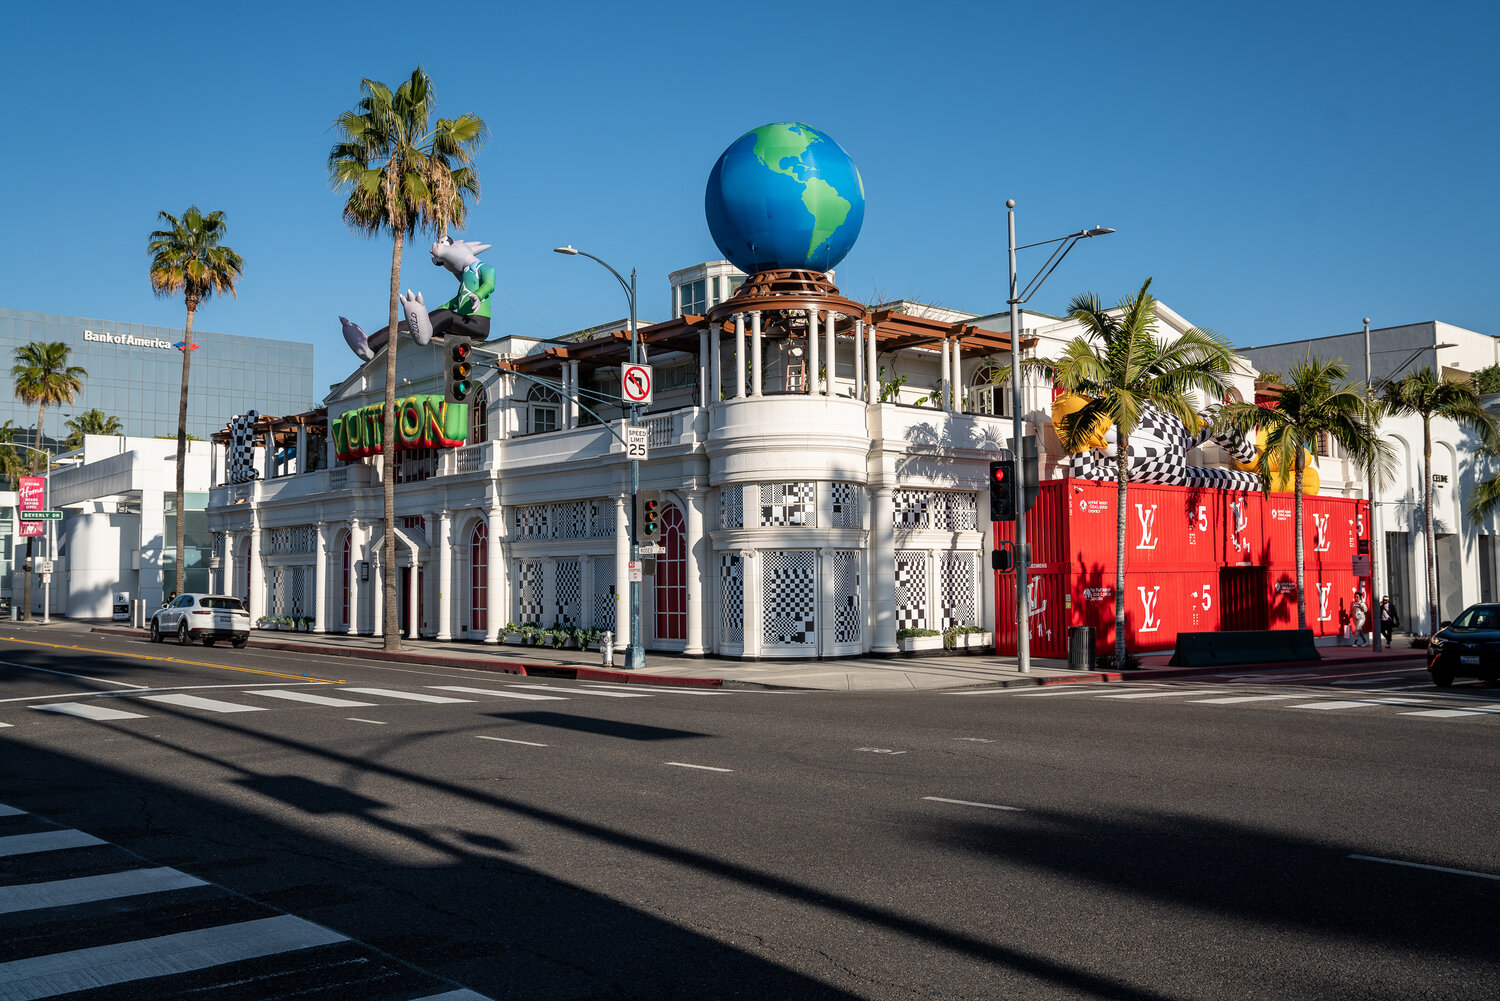 Louis Vuitton Returns to Rodeo Drive With a Whimsical New Pop-up